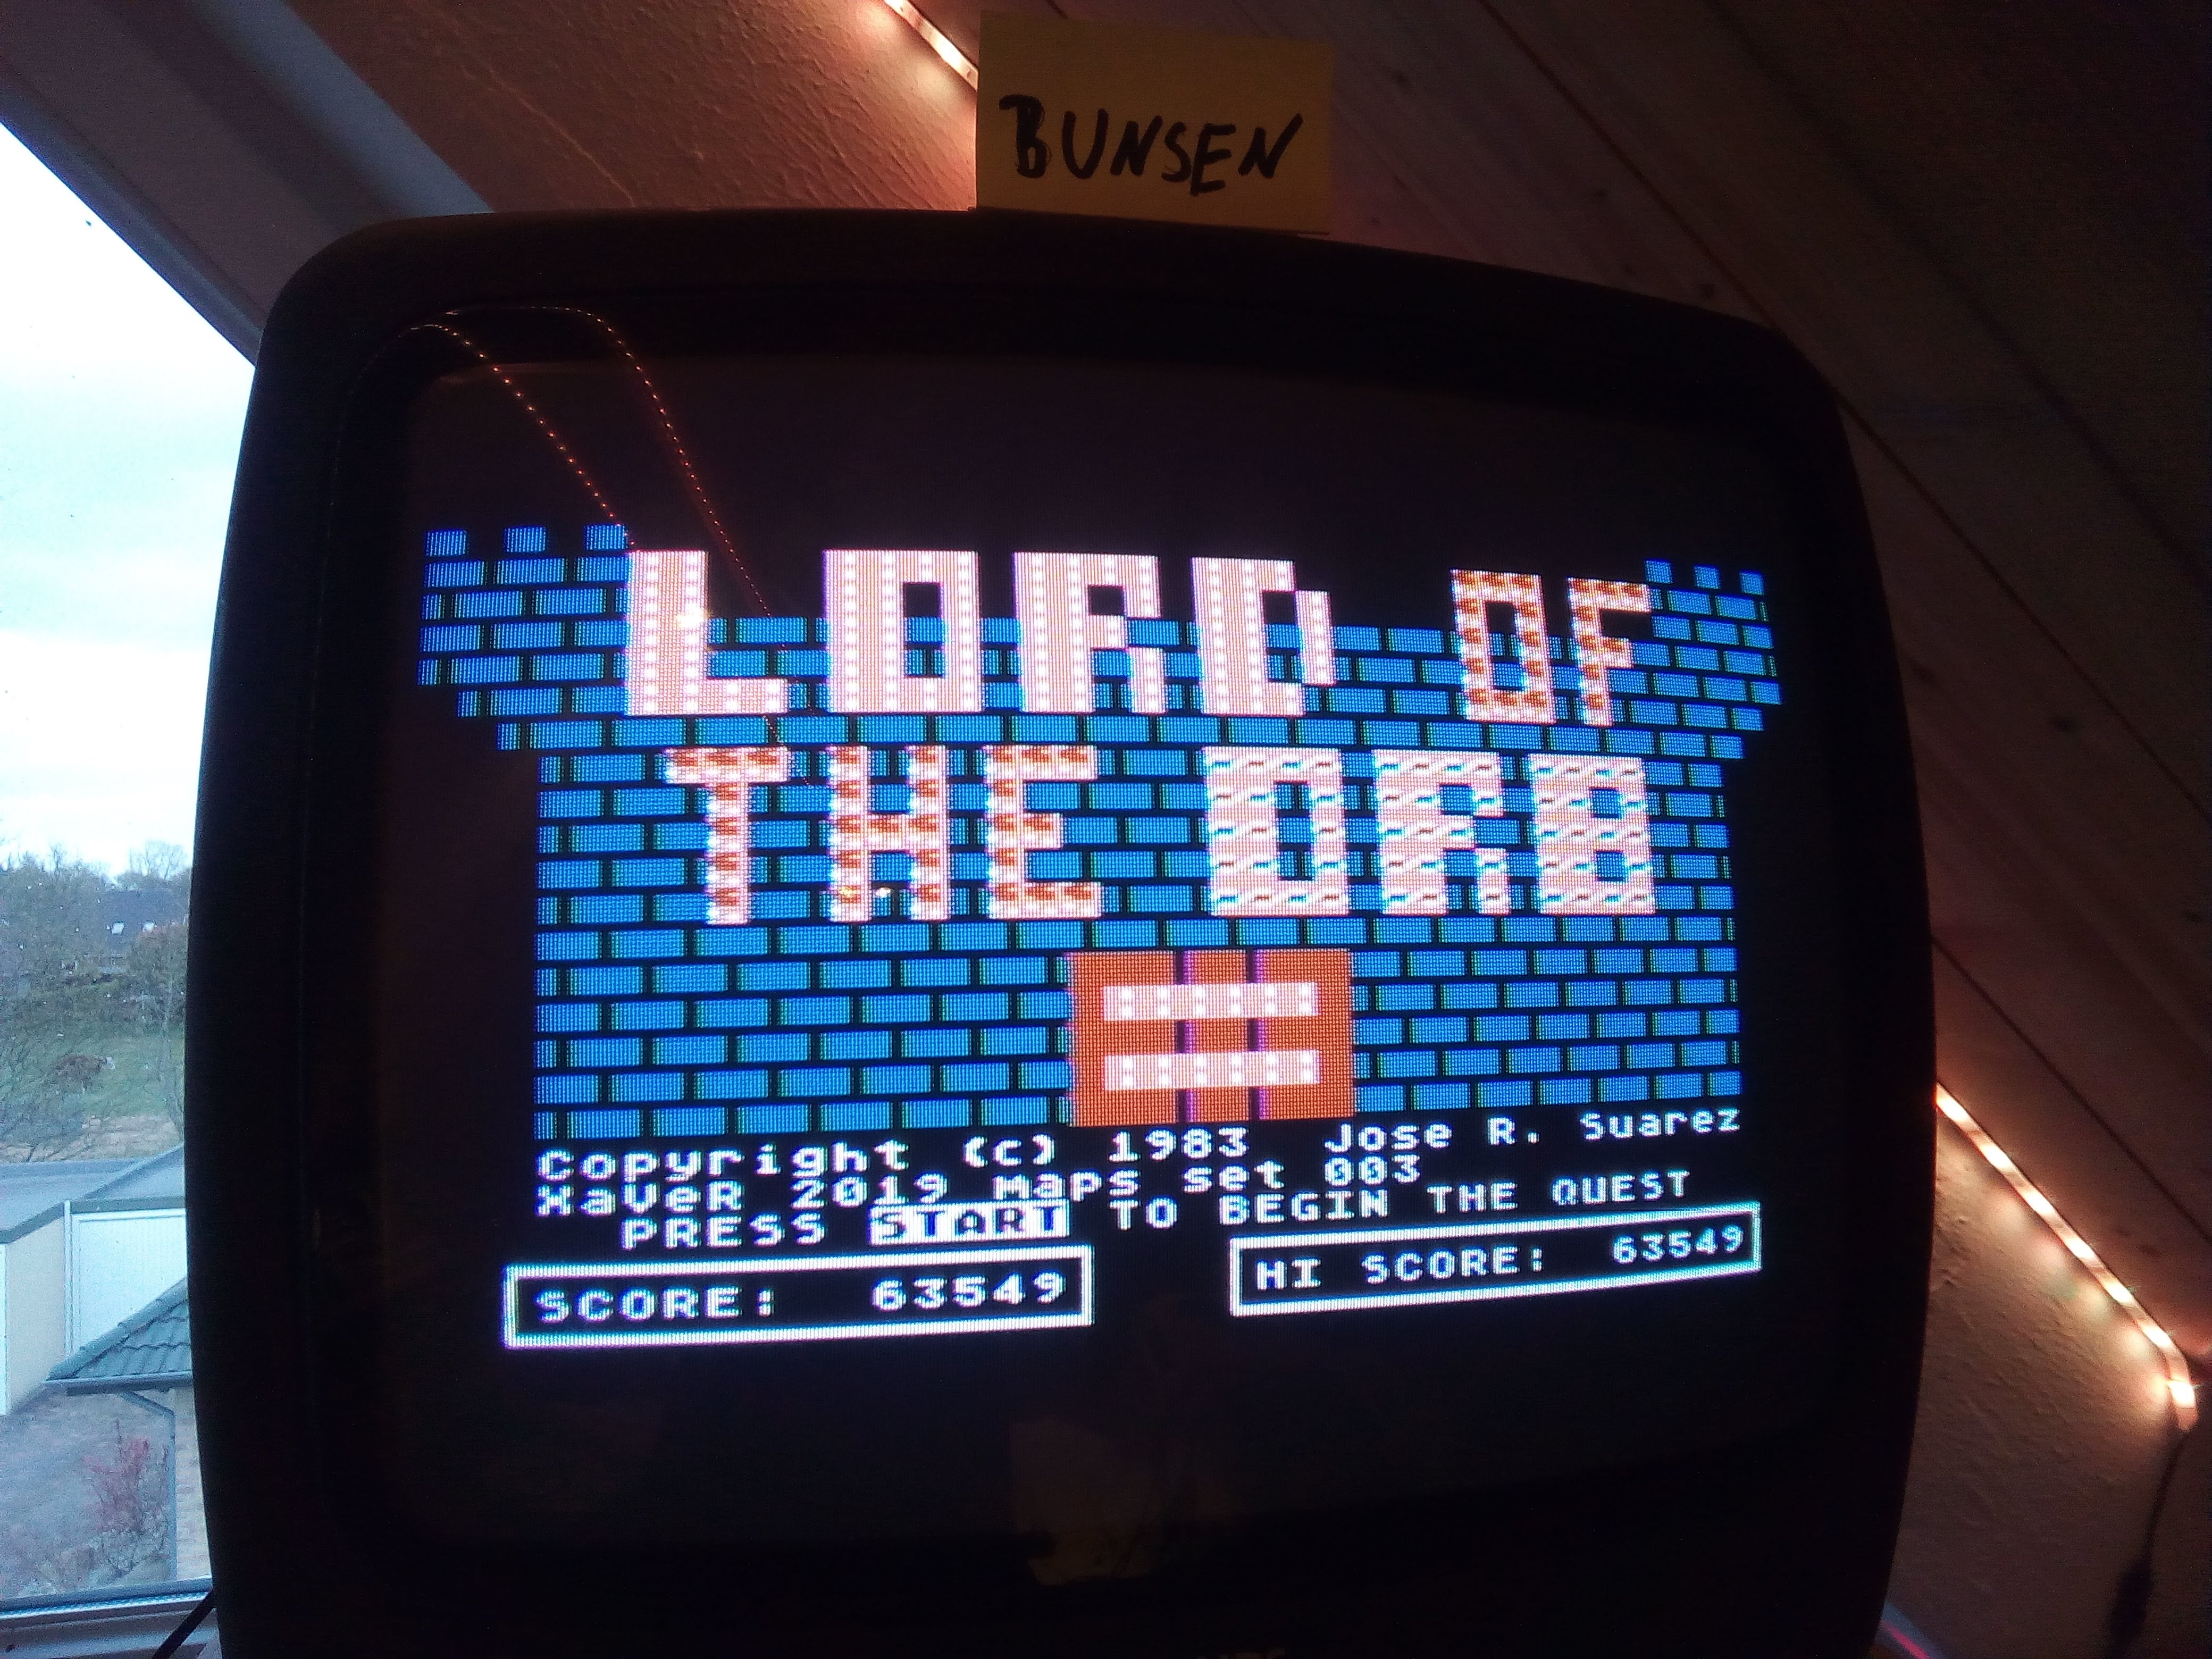 Bunsen: Lord of the Orb [Set 003] (Atari 400/800/XL/XE) 63,549 points on 2020-04-25 14:58:10